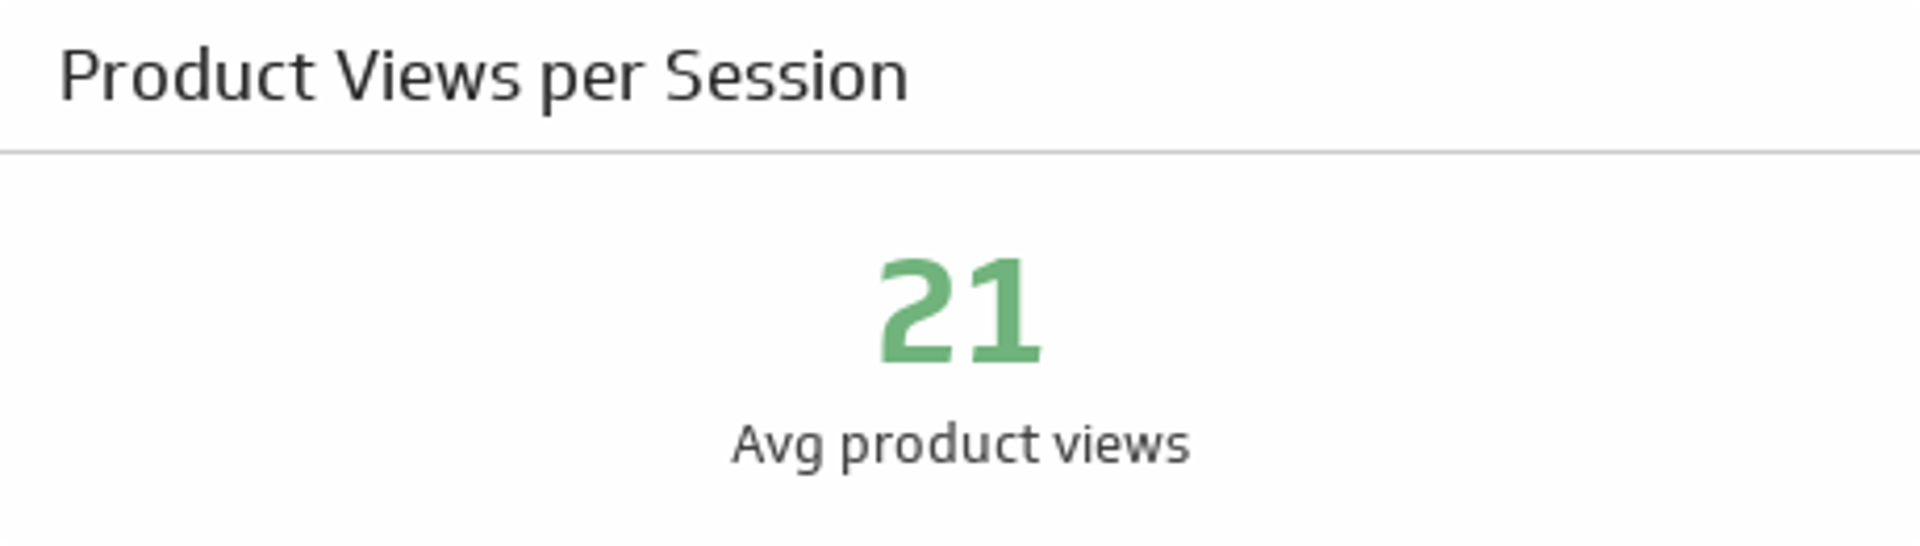 Ecommerce KPI Example - Product Views per Session Metric